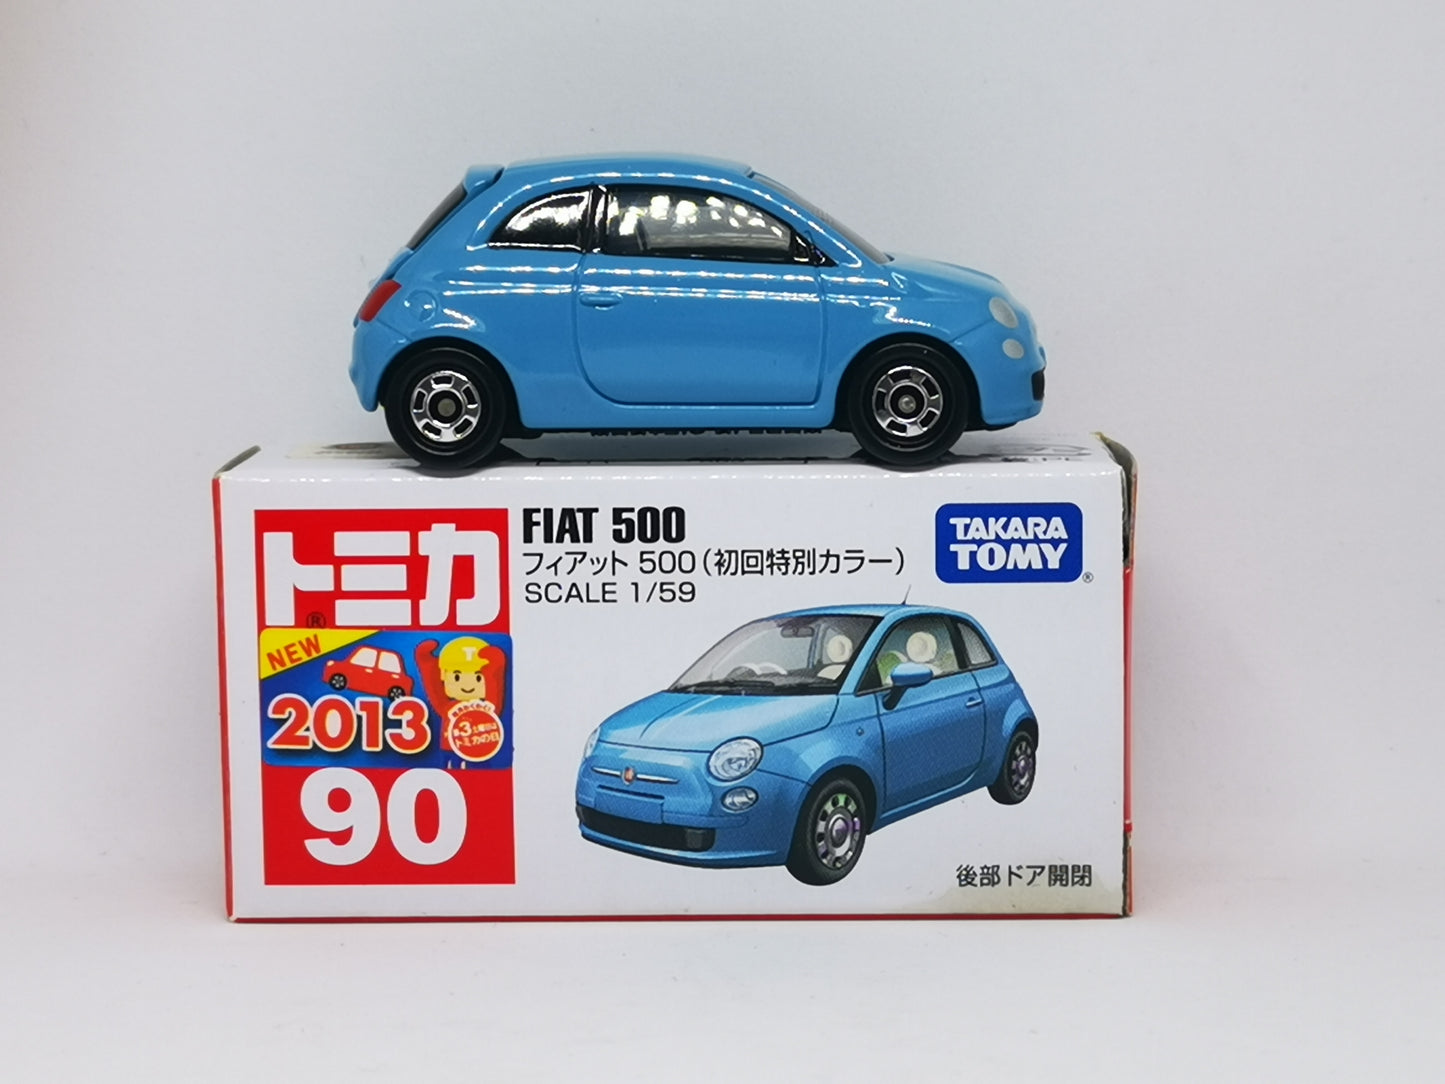 Tomica #90 FIAT 500 1st Edition